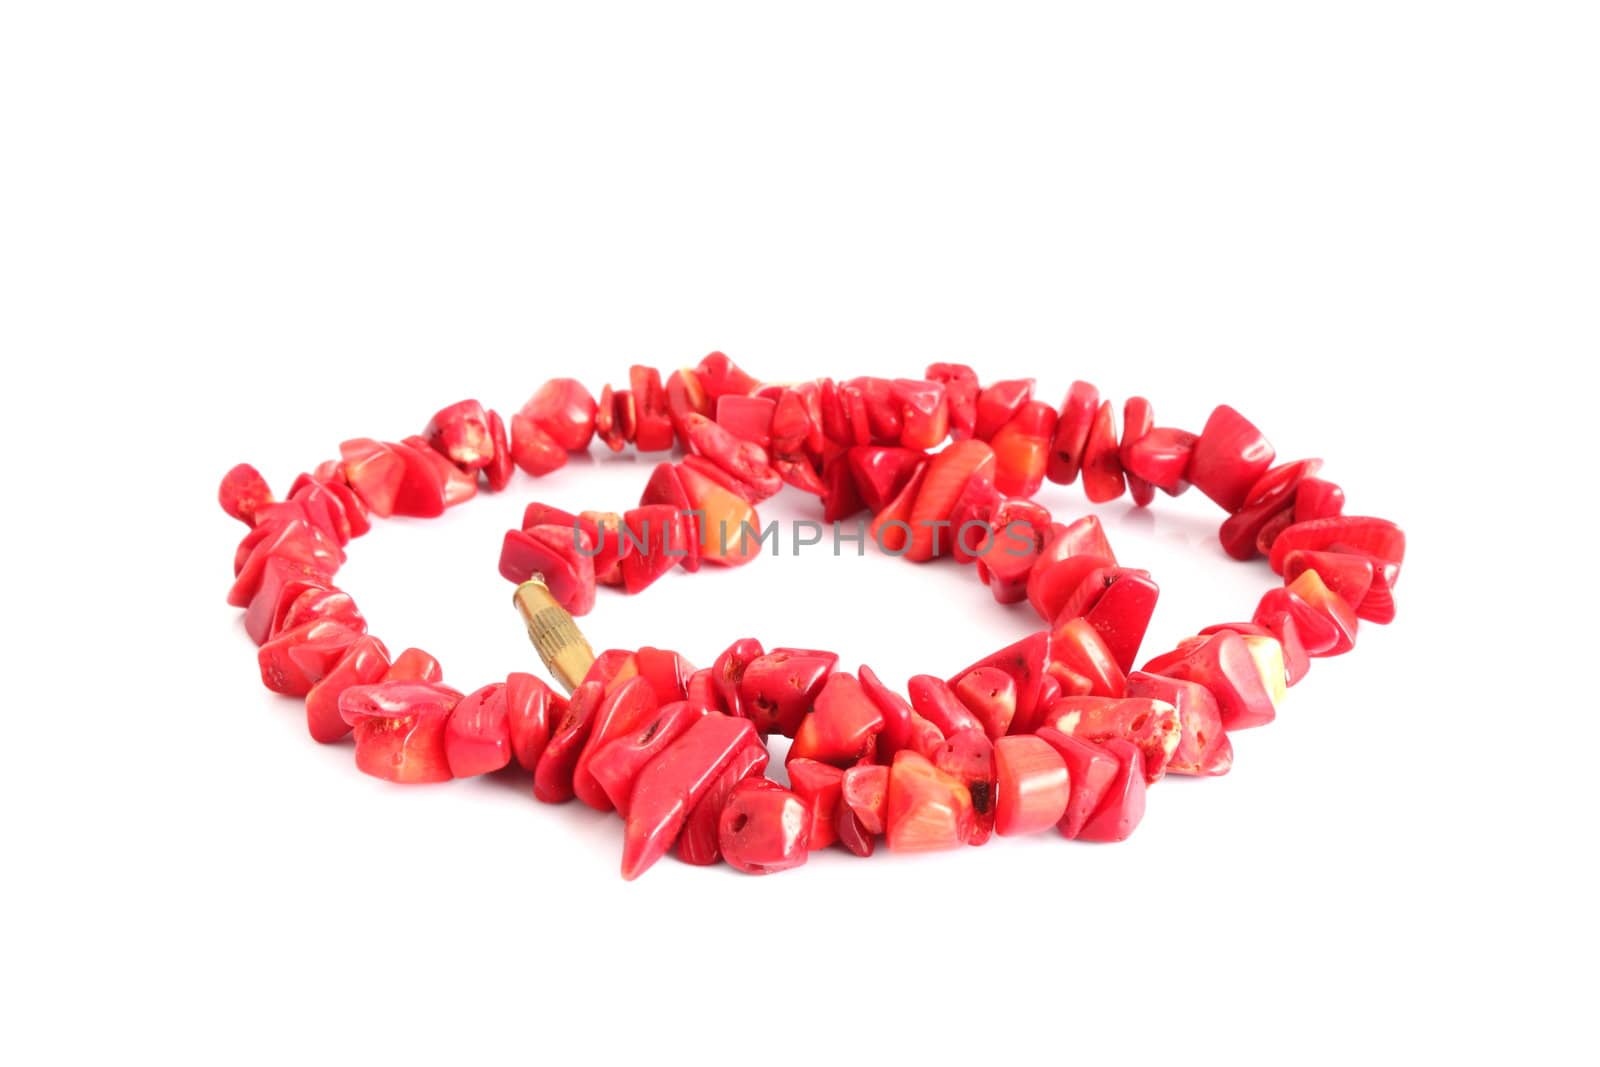 glamour jewel made from red coral over white background